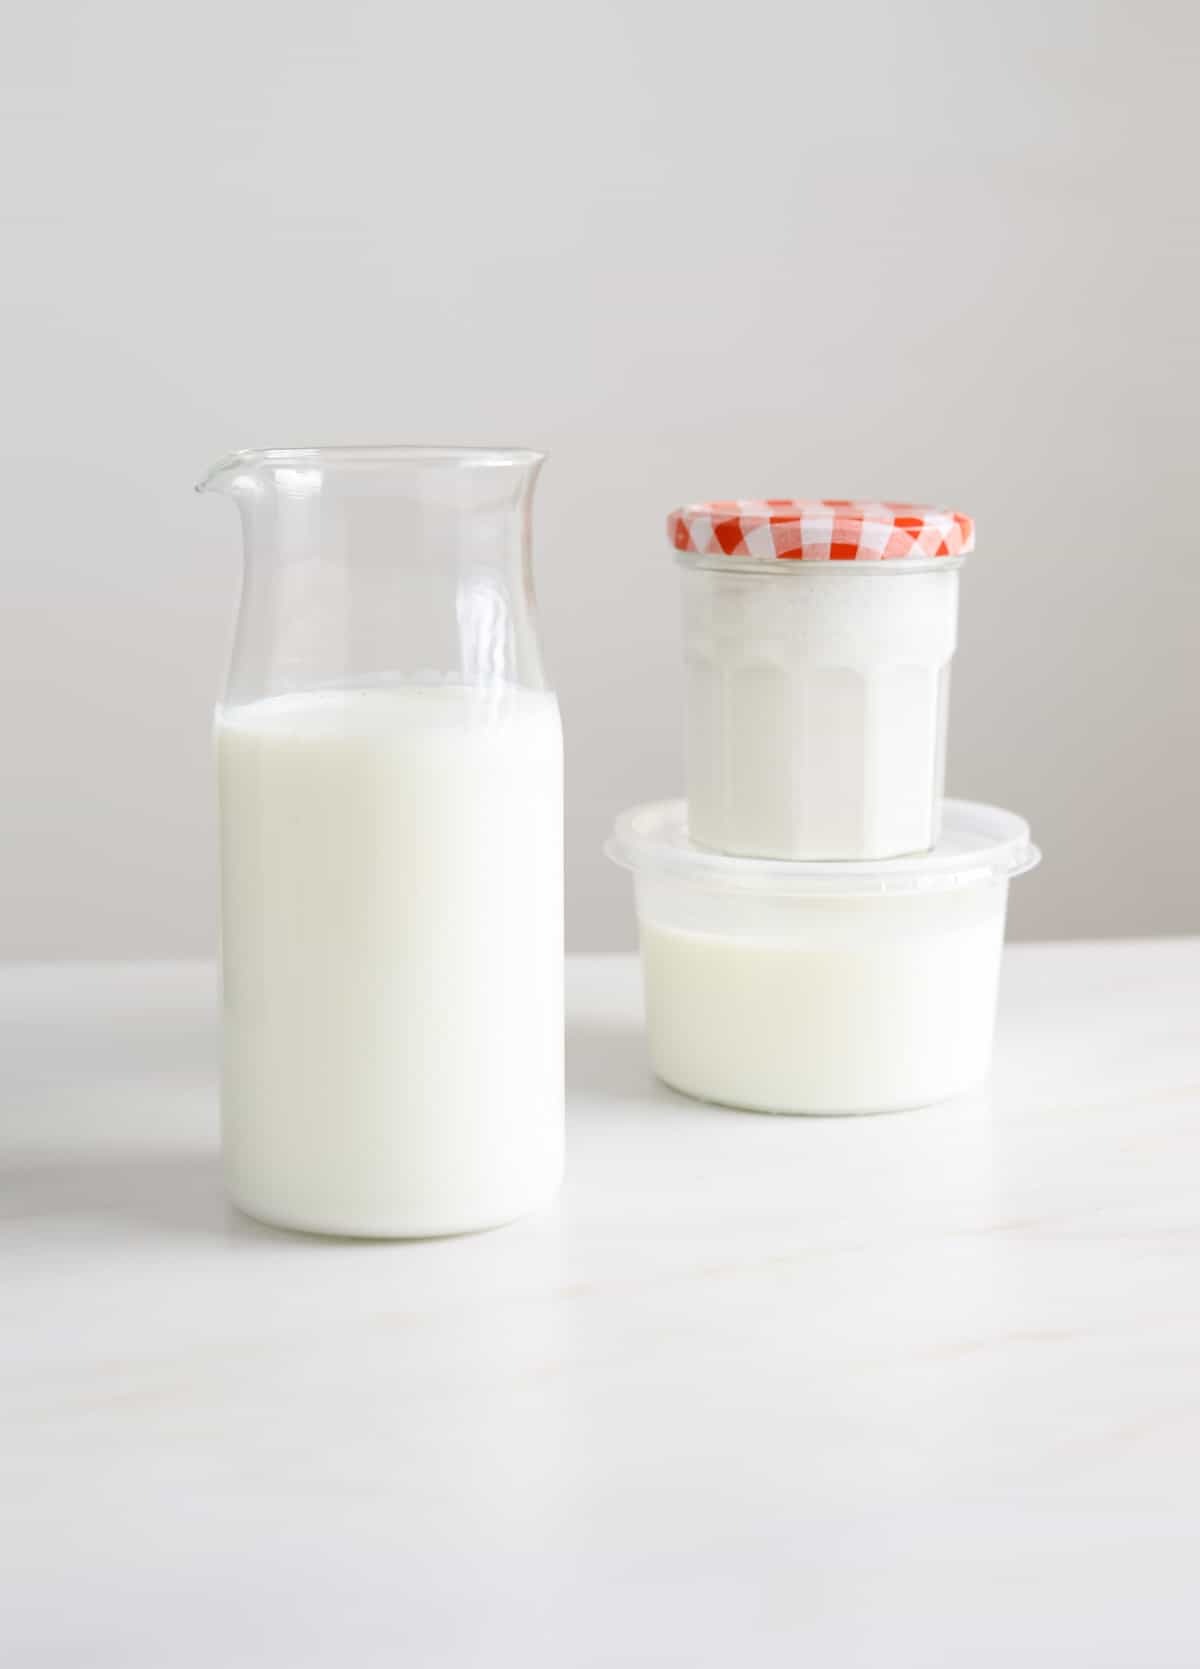 Three glass containers filled with buttermilk on a white marble background.